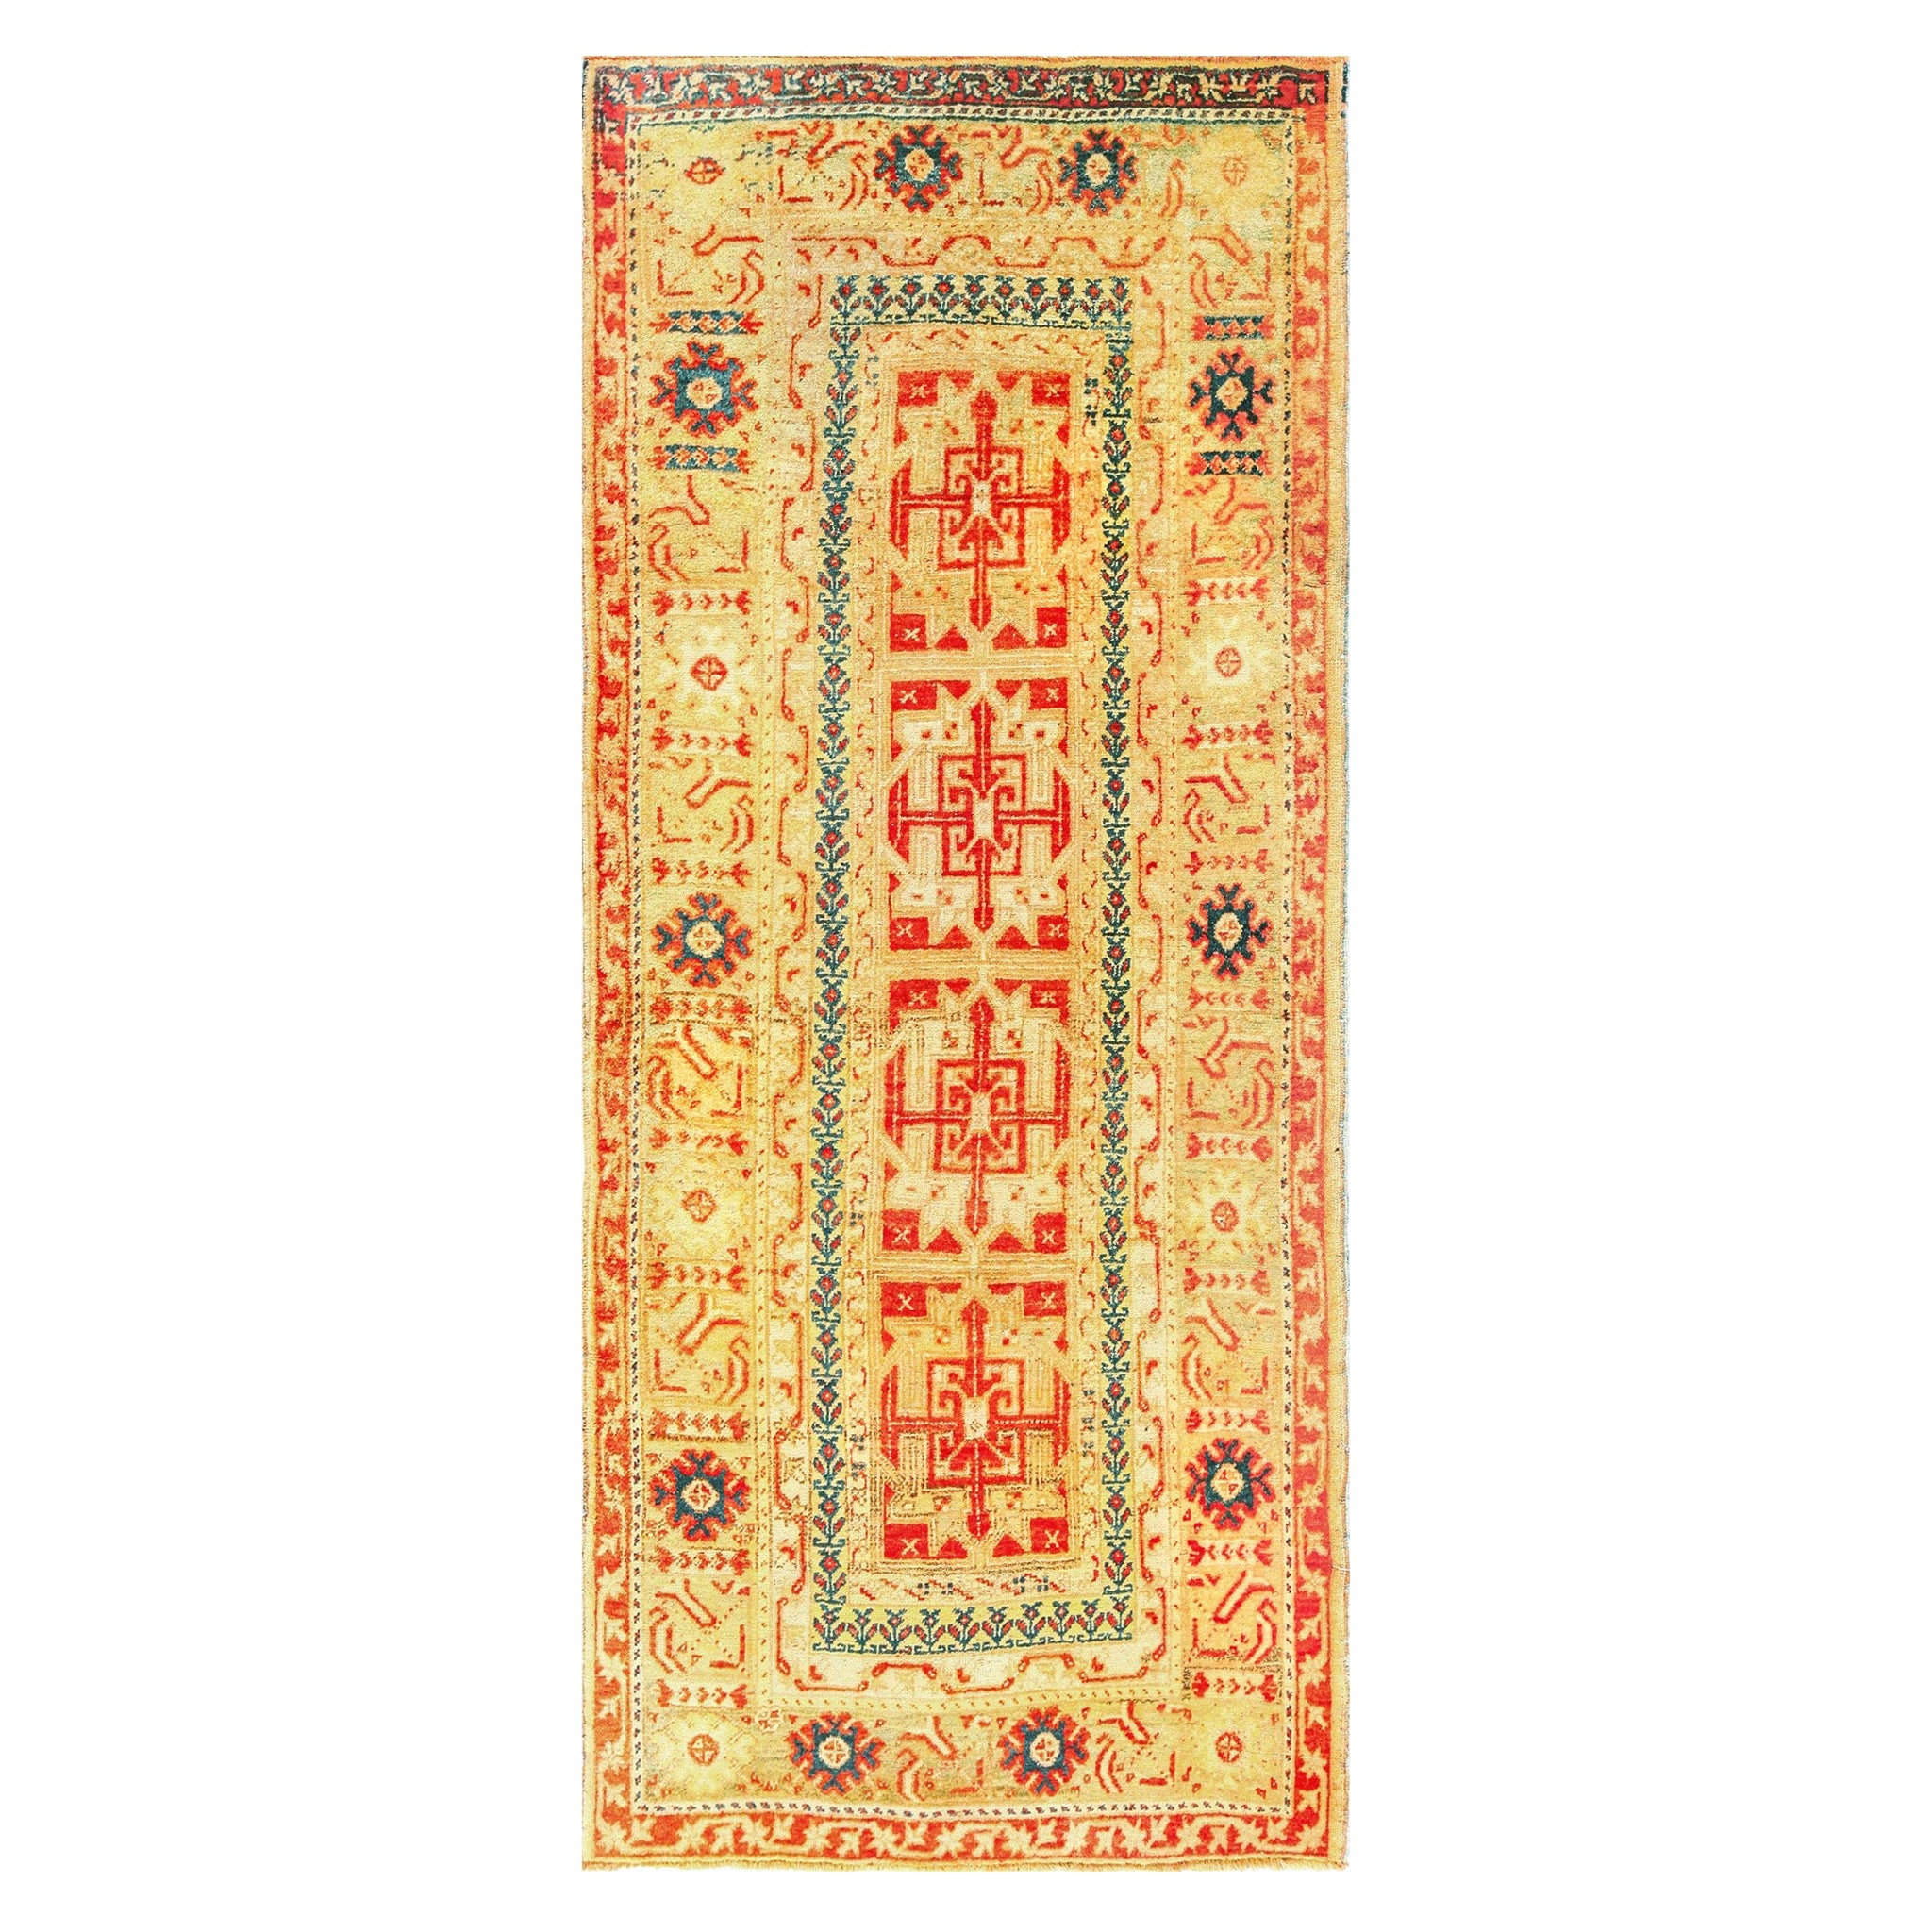 Nazmiyal Collection Antique Turkish Oushak Runner. Size: 4 ft x 9 ft 6 in 